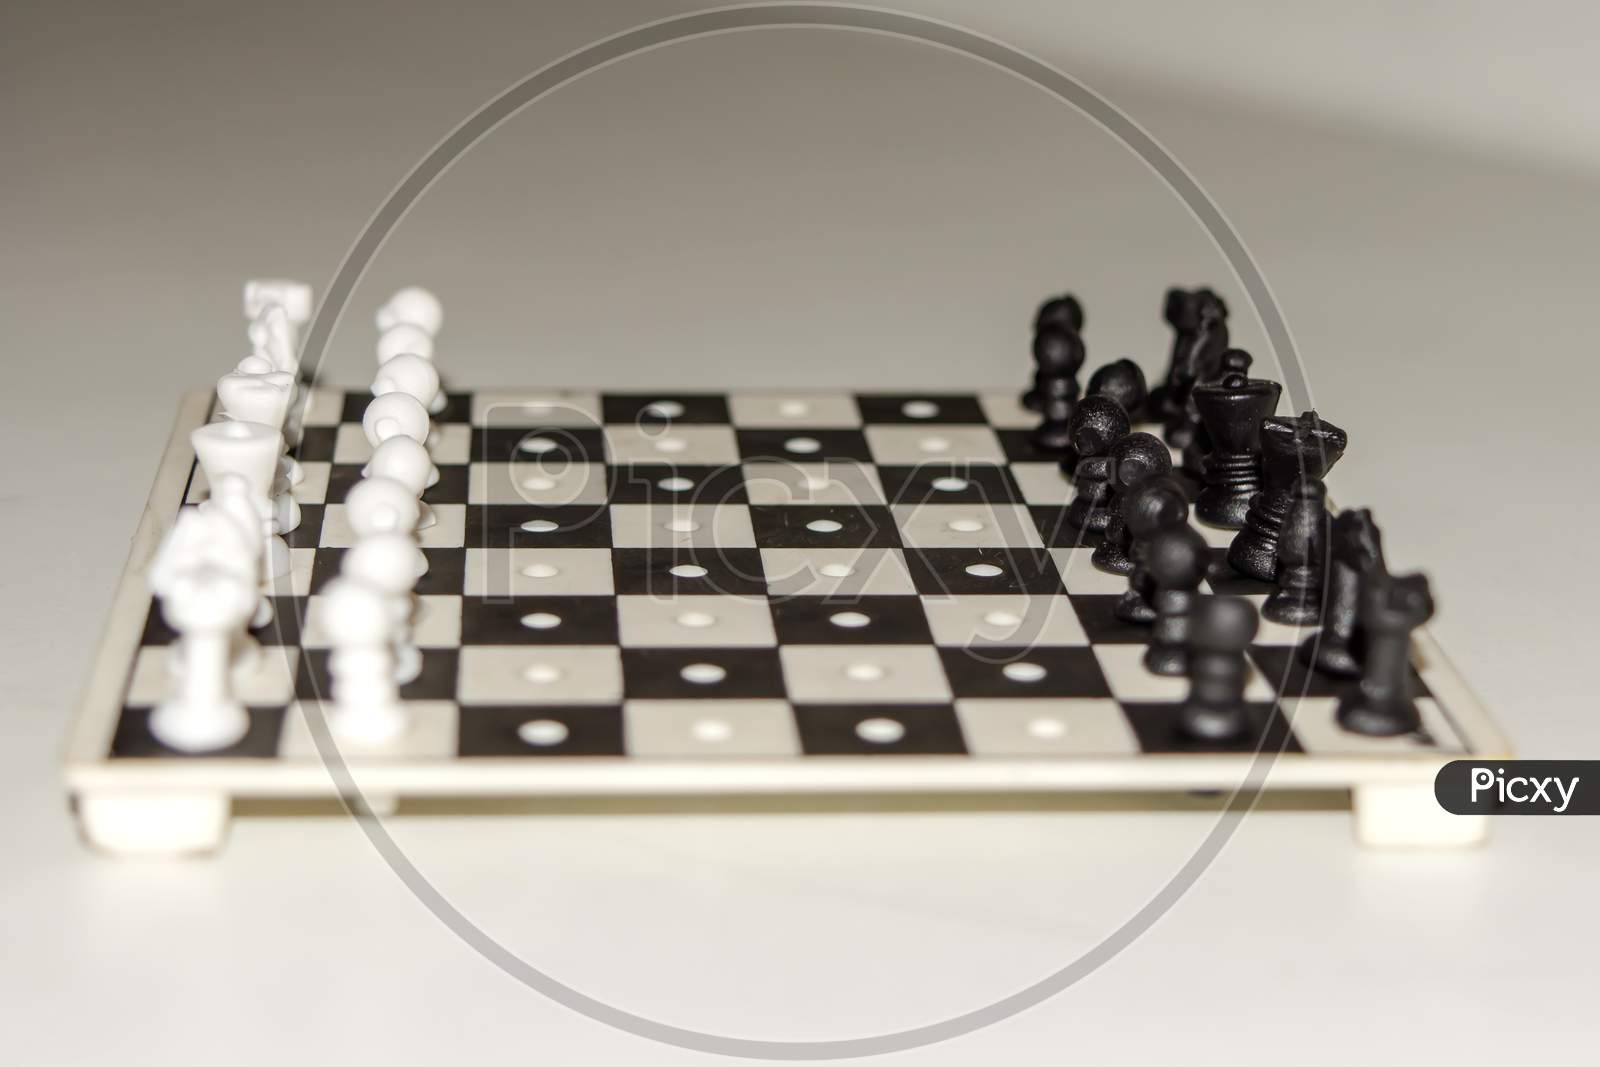 Chess board with figures on isolate white background.